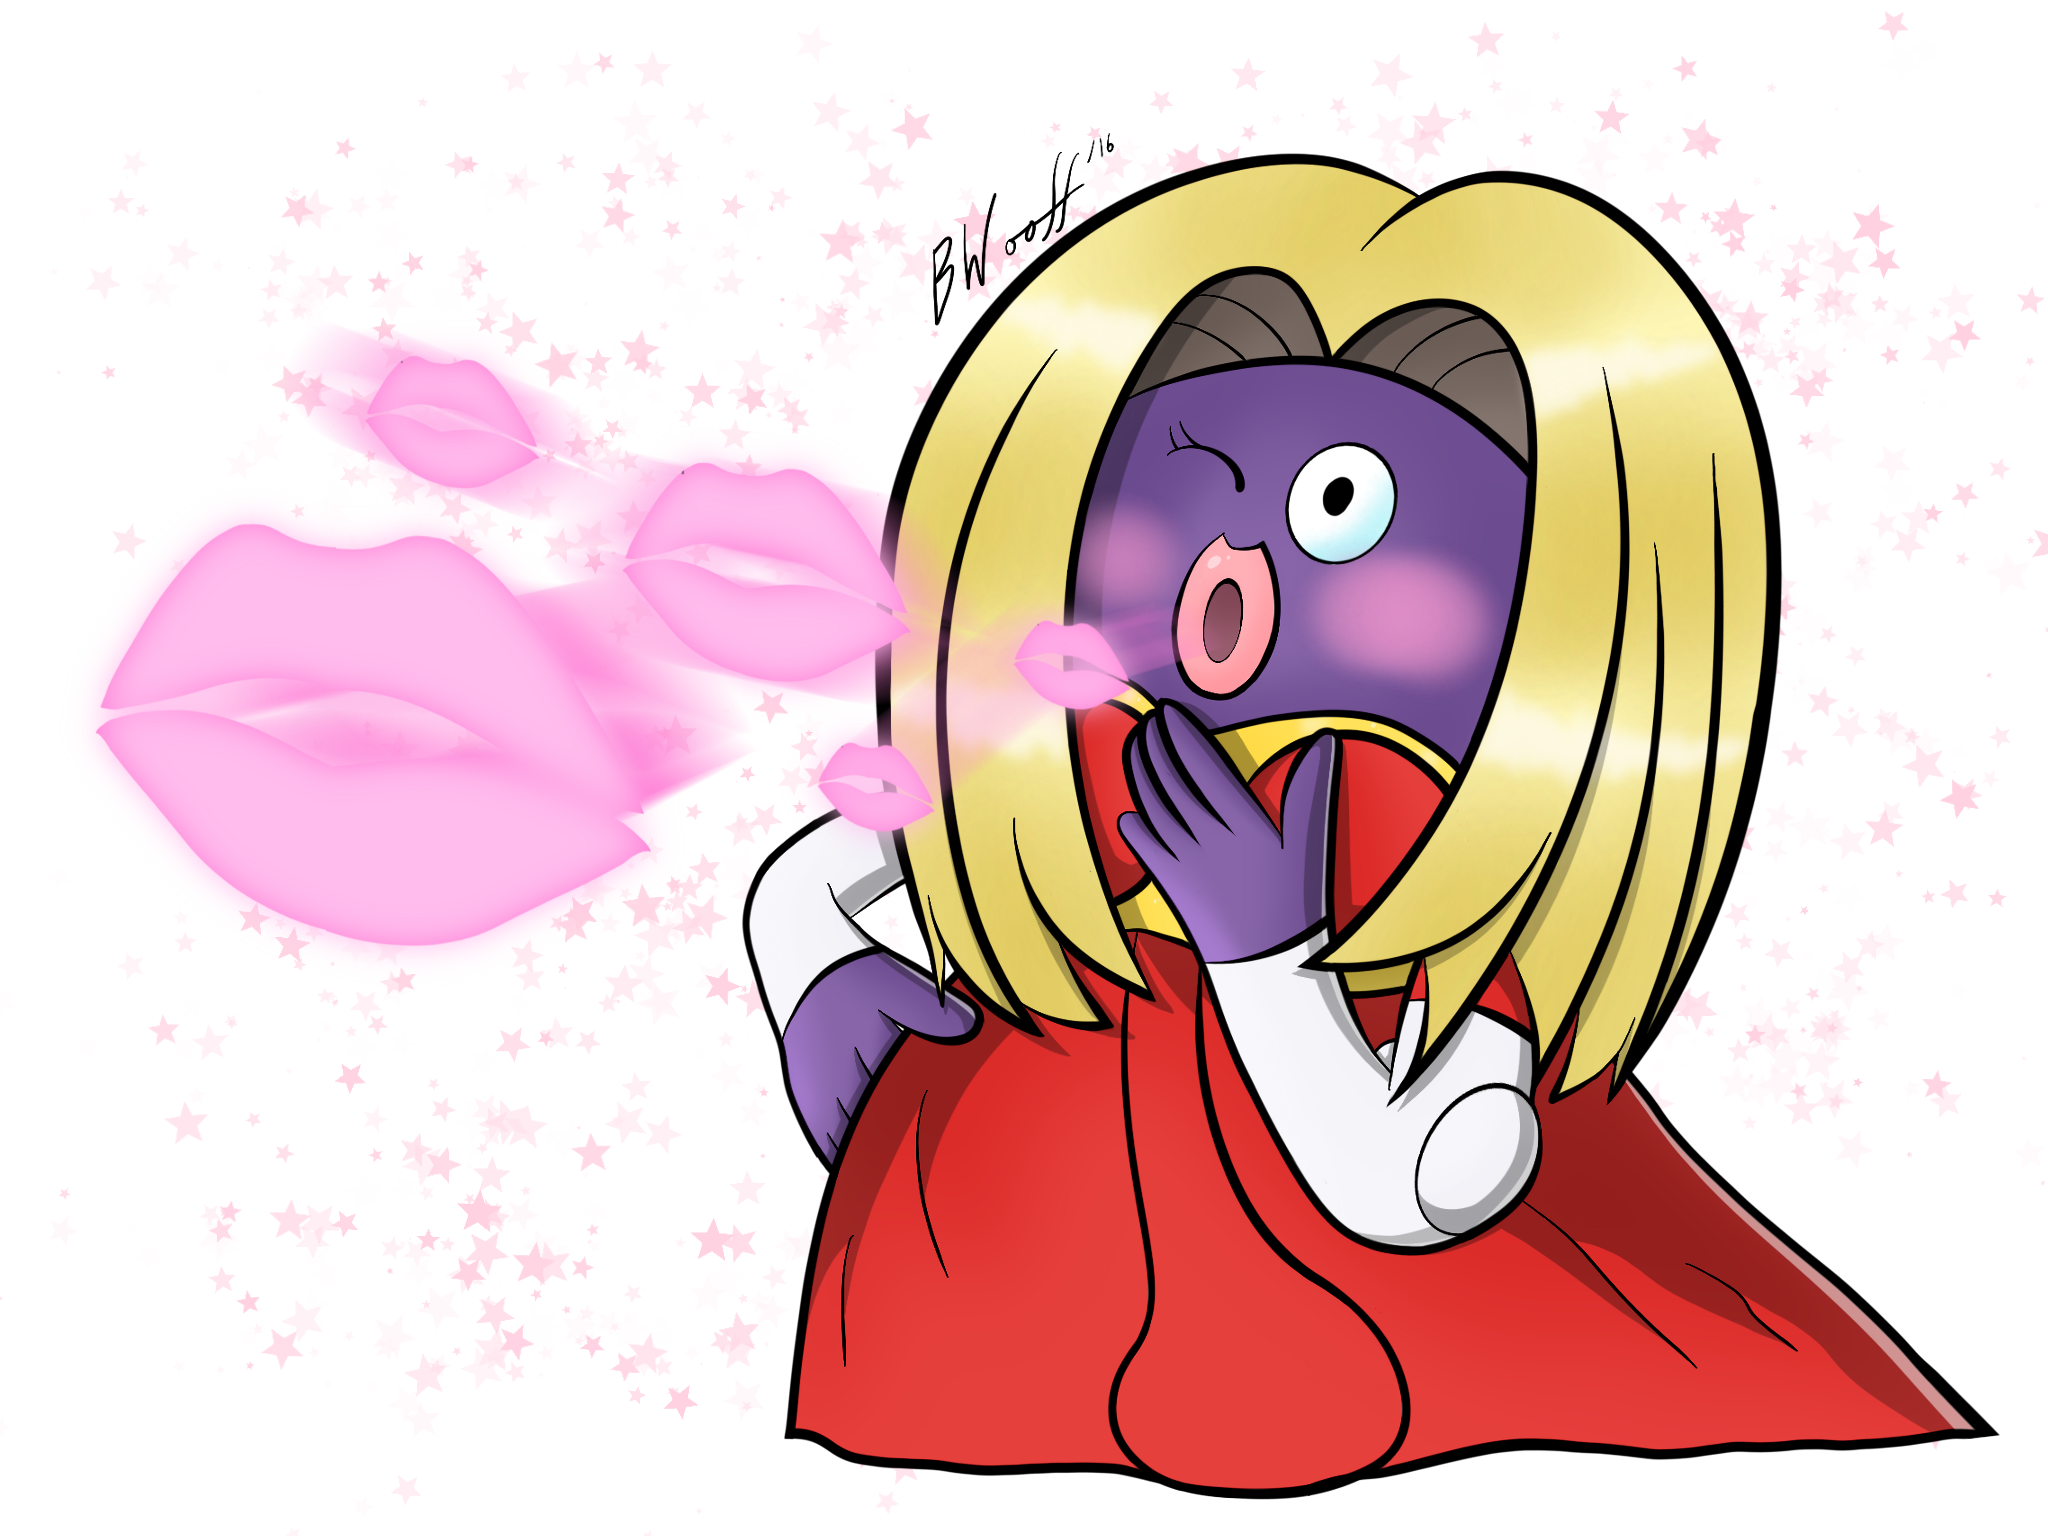 jynx-used-lovely-kiss-by-freqrexy